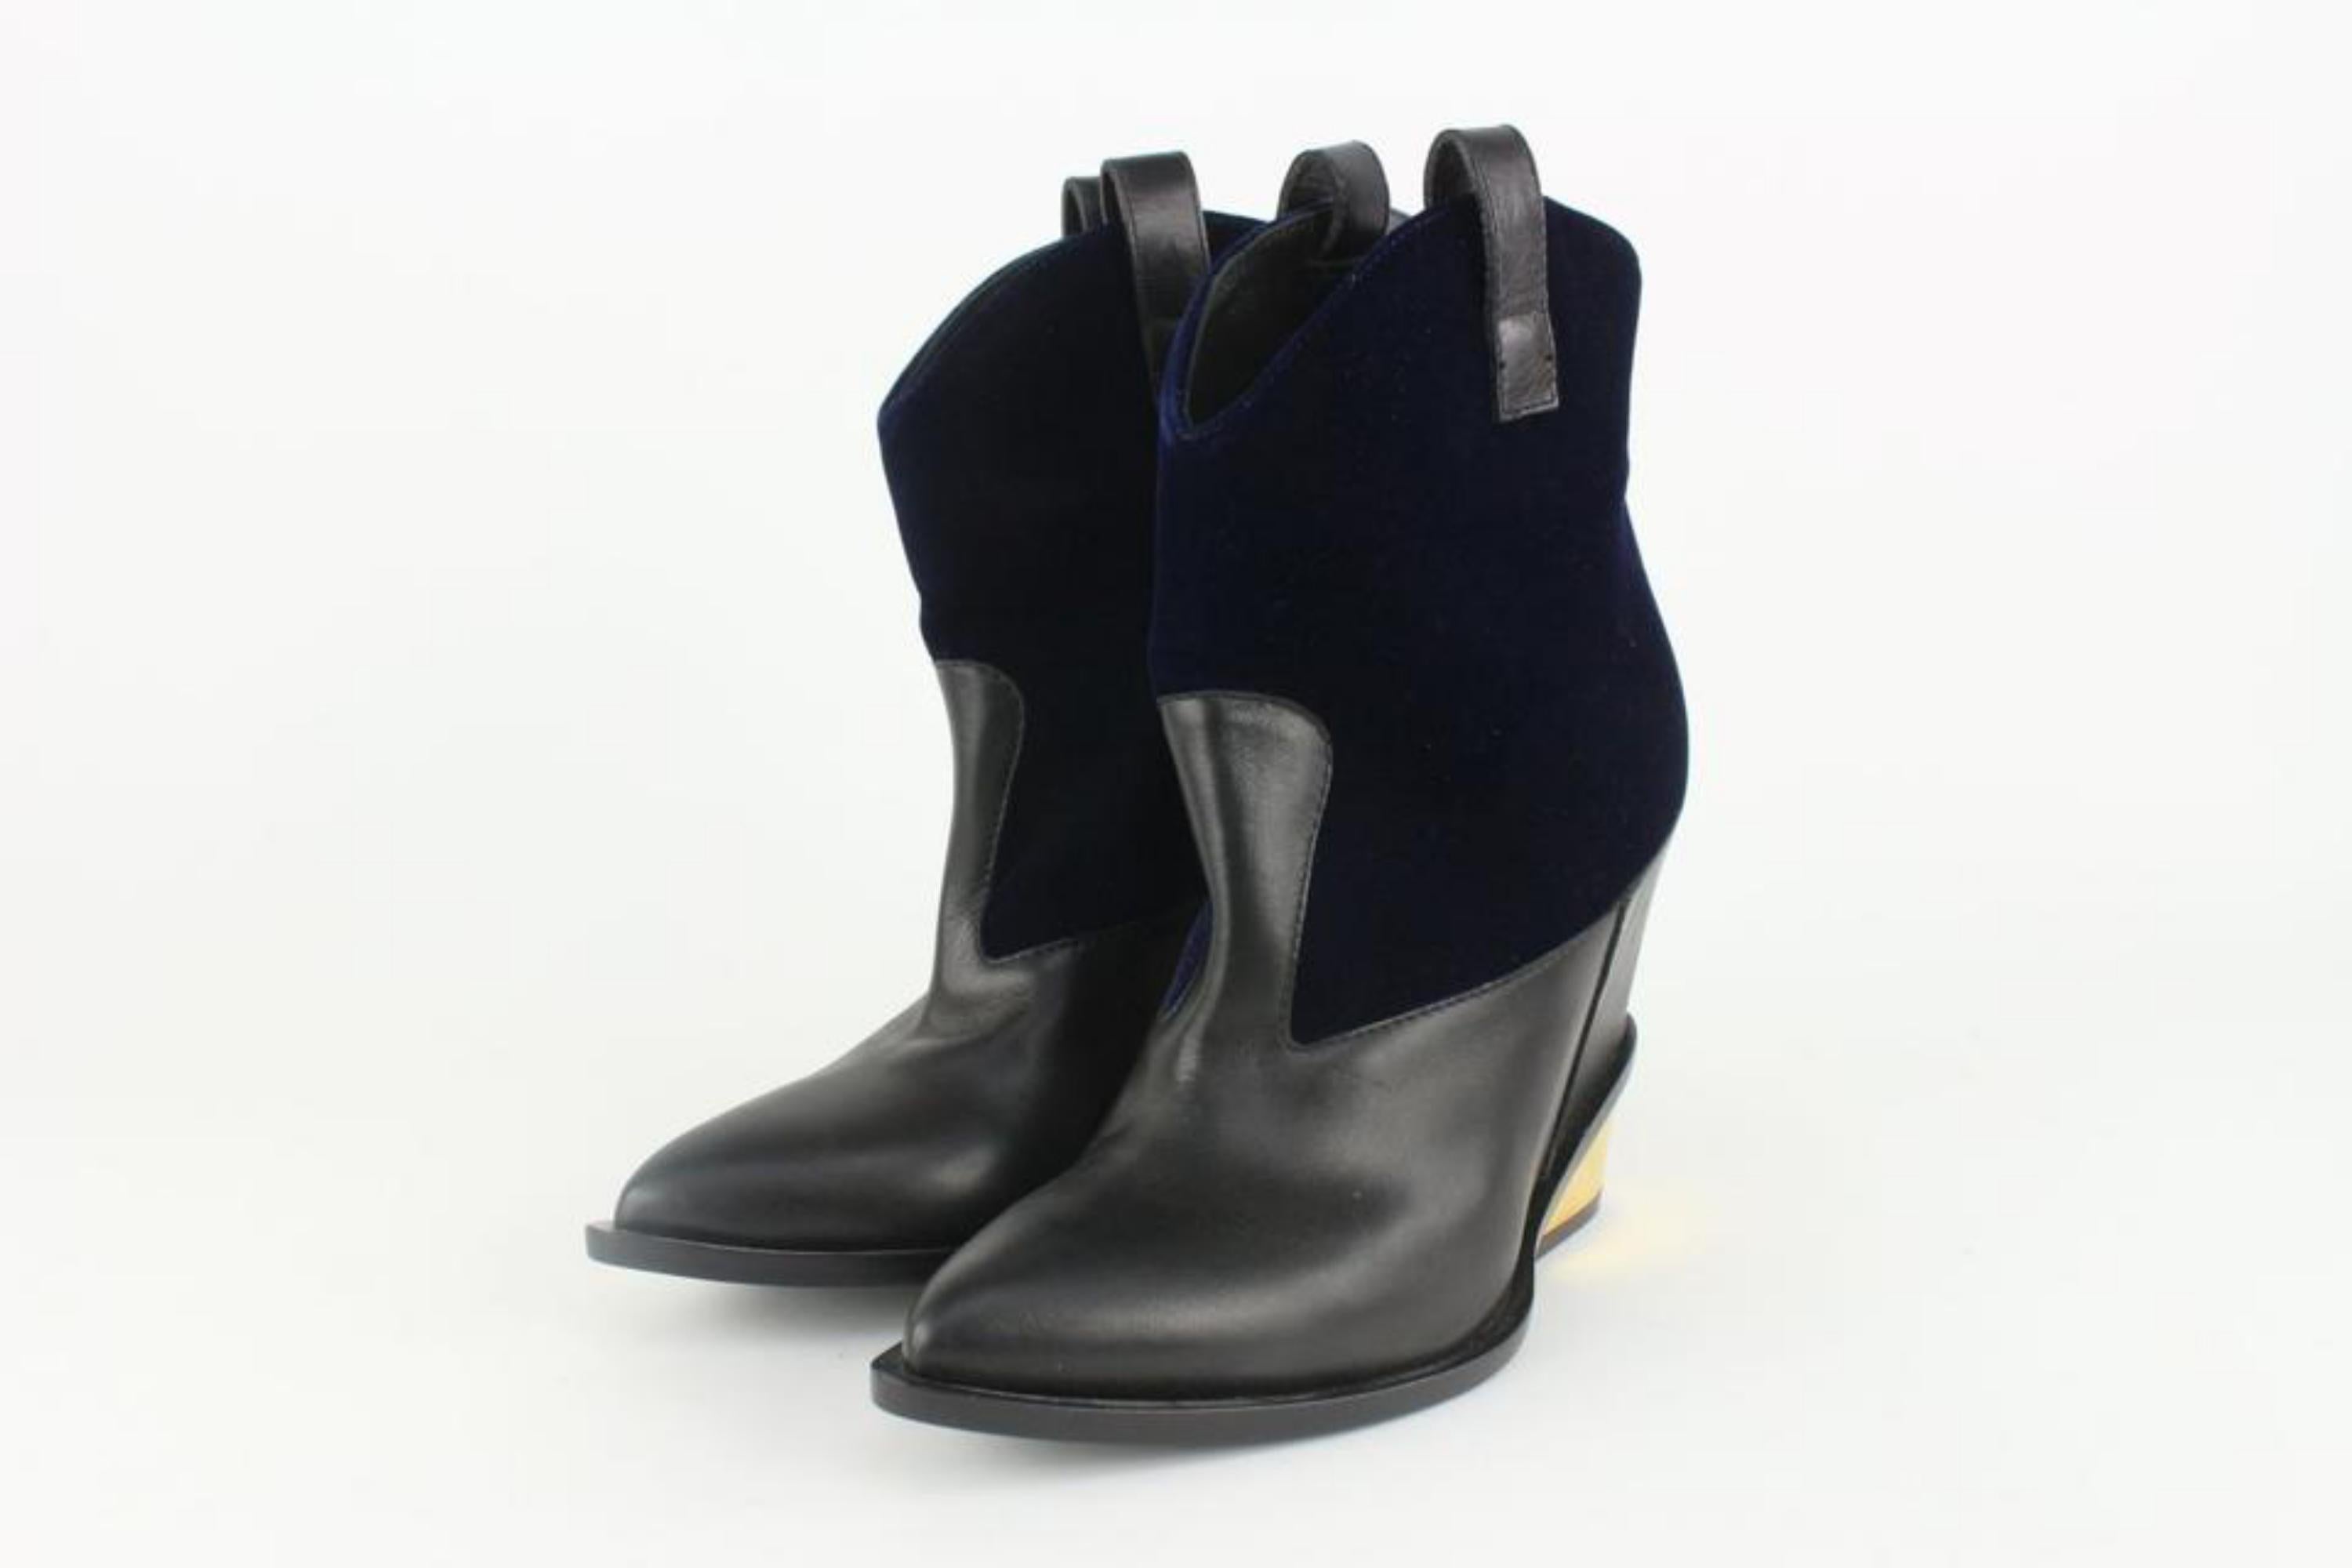 Giuseppe Zanotti Size 40 Black x Gold Velour x Leather Ankle Booties Boots 1GZ1116
Made In: Italy
Measurements: Length: 9.5 